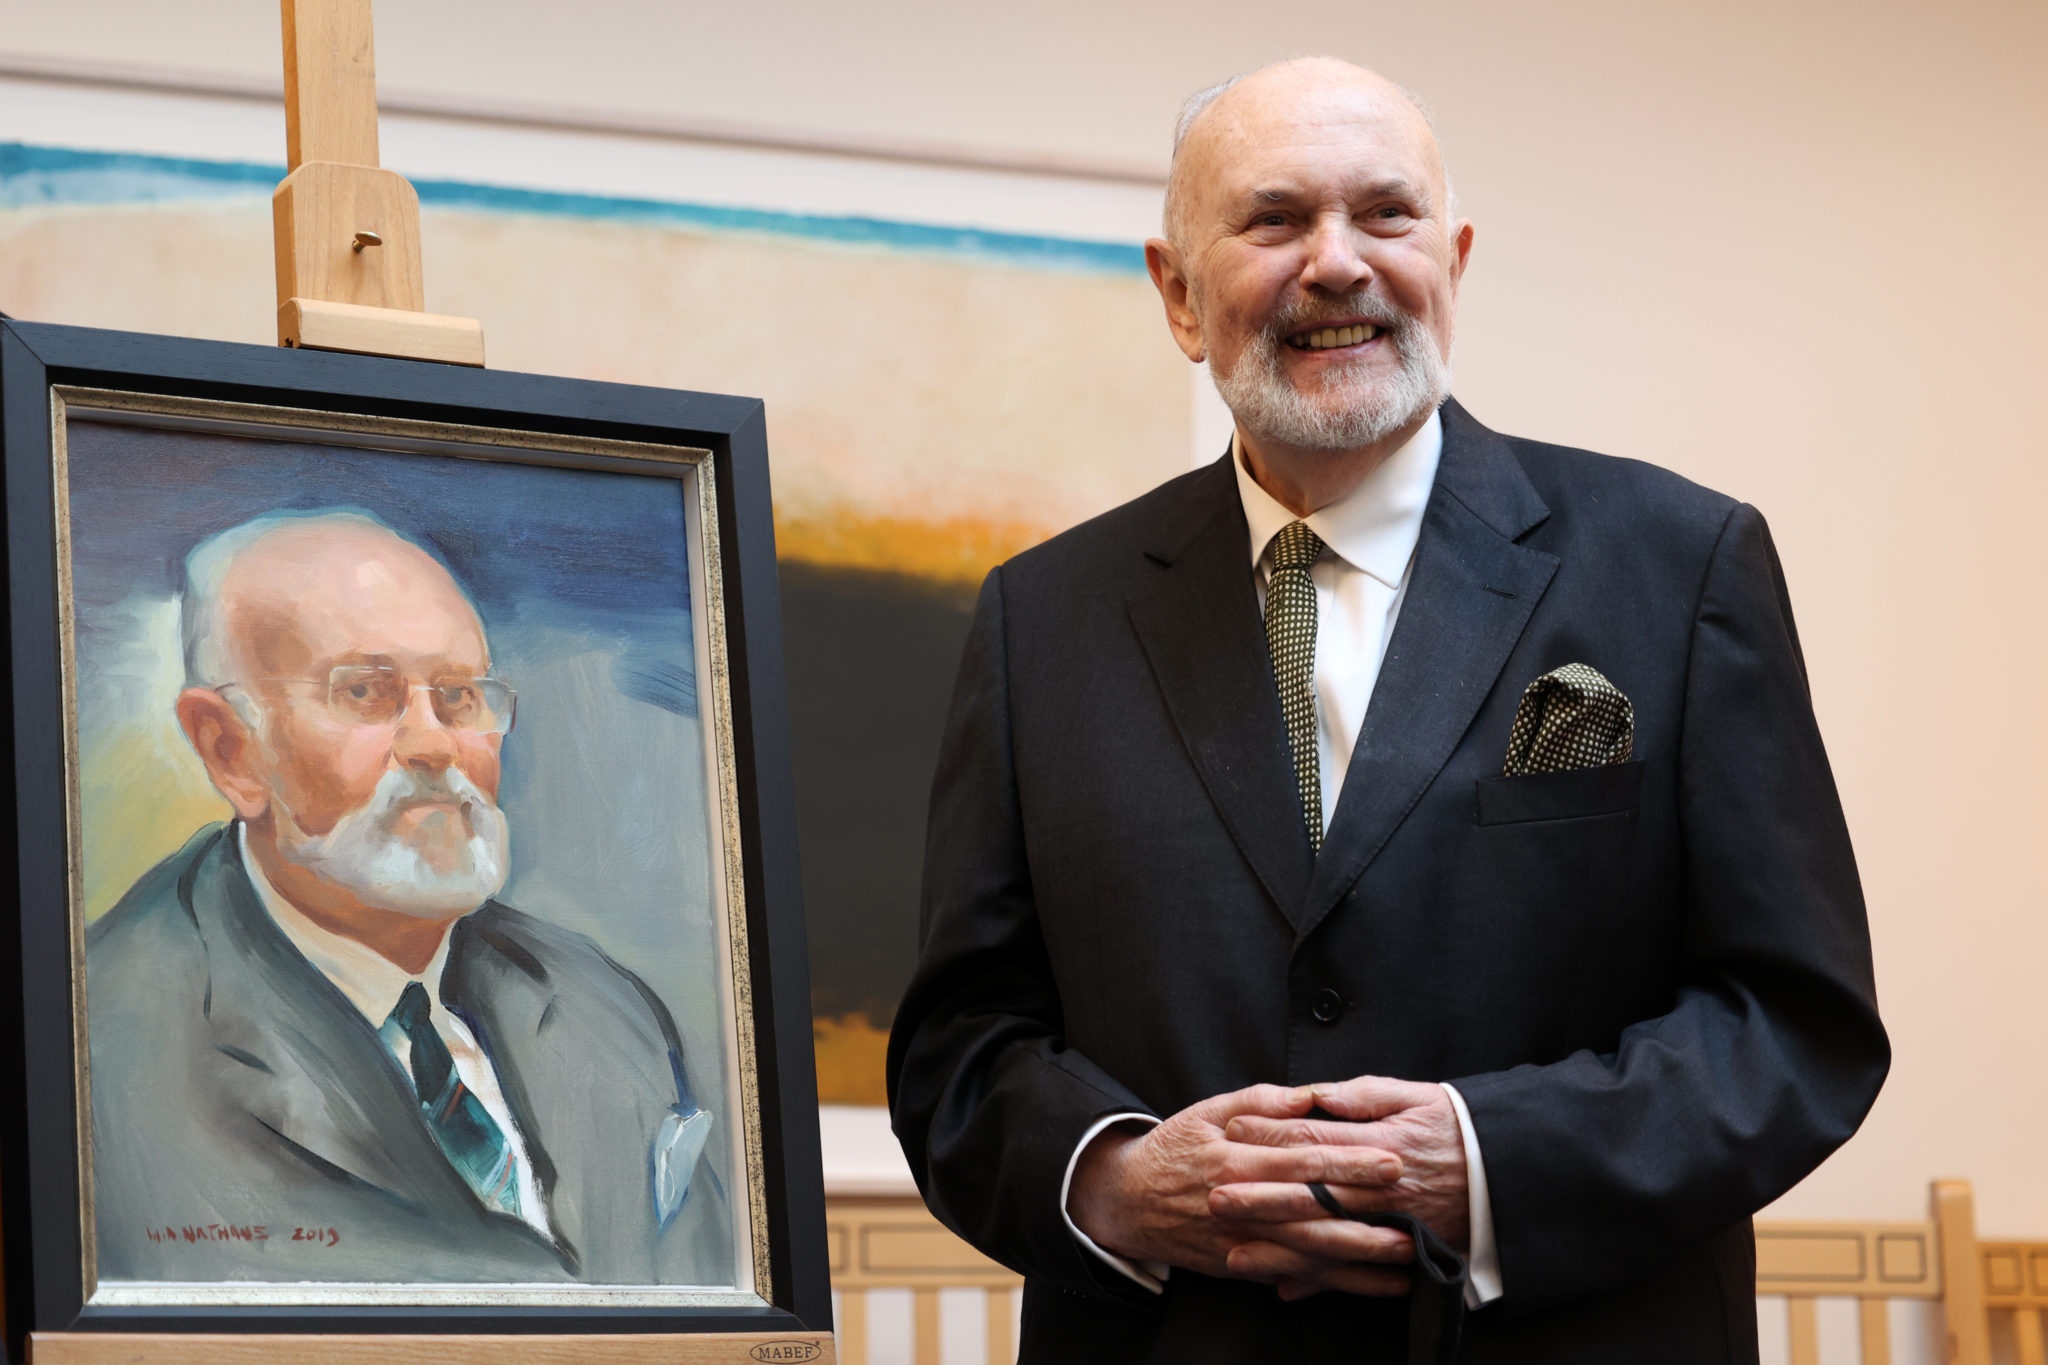 Independent Senator David Norris at a ceremony in Leinster House, as his Seanad colleagues presented him with a portrait of himself by artist William Nathans.